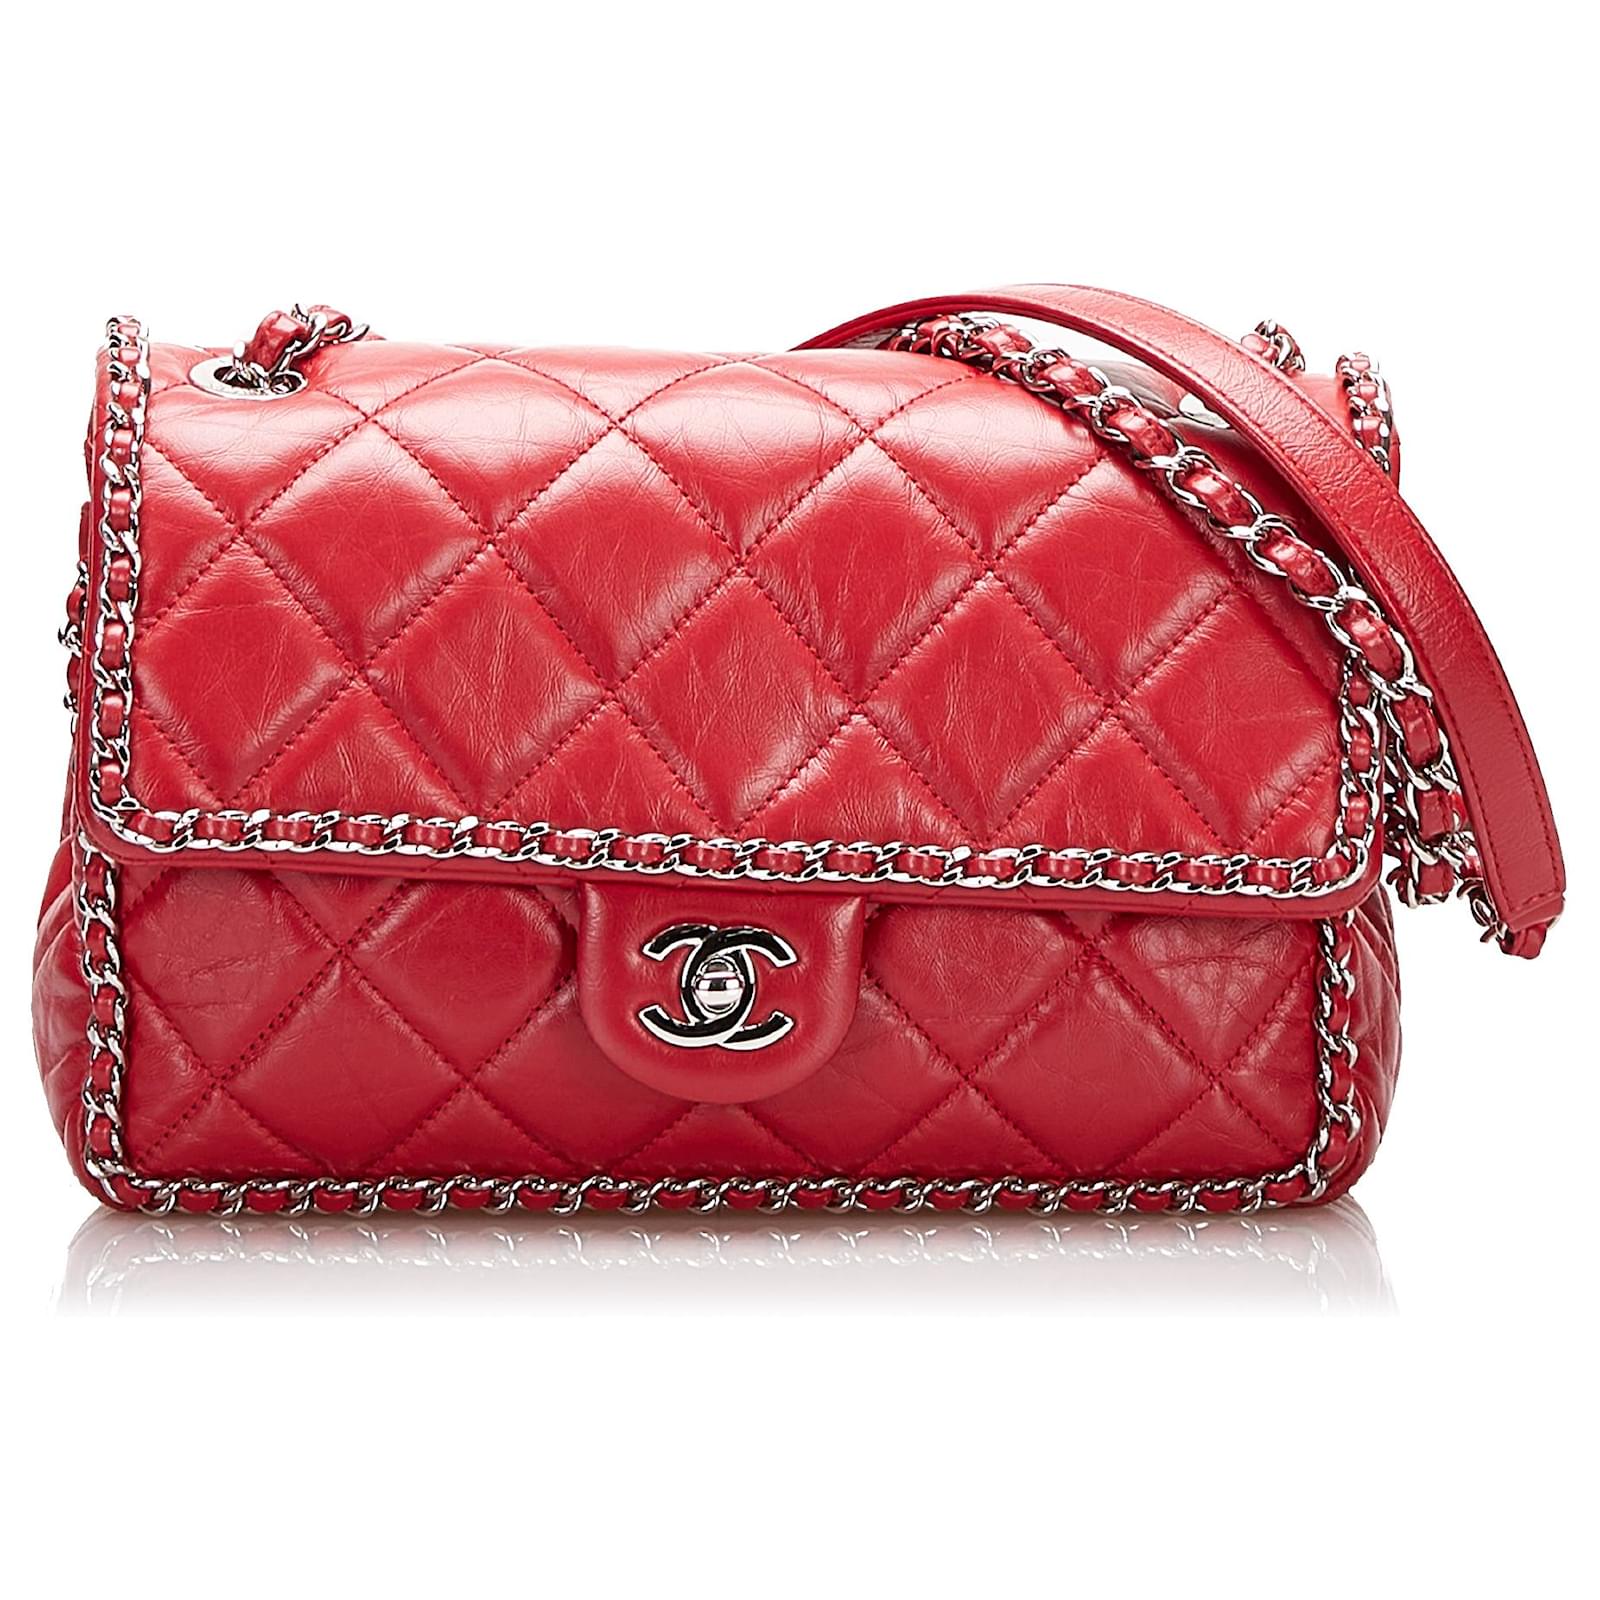 CHANEL Pre-Owned 1985-1990 CC Quilted Shoulder Bag - Farfetch